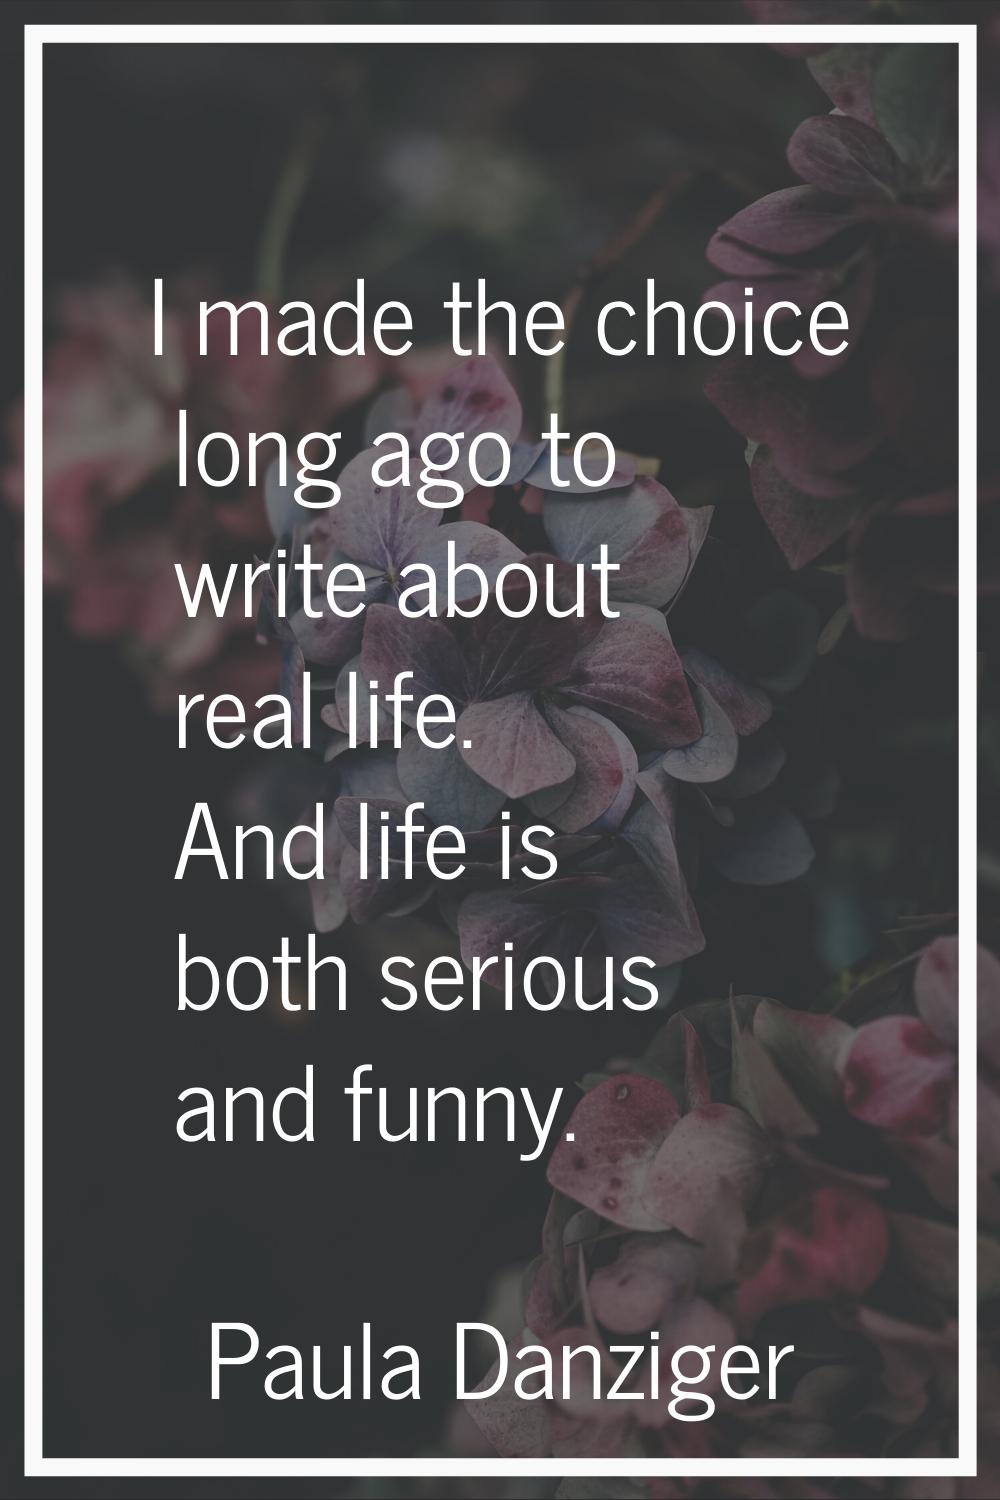 I made the choice long ago to write about real life. And life is both serious and funny.